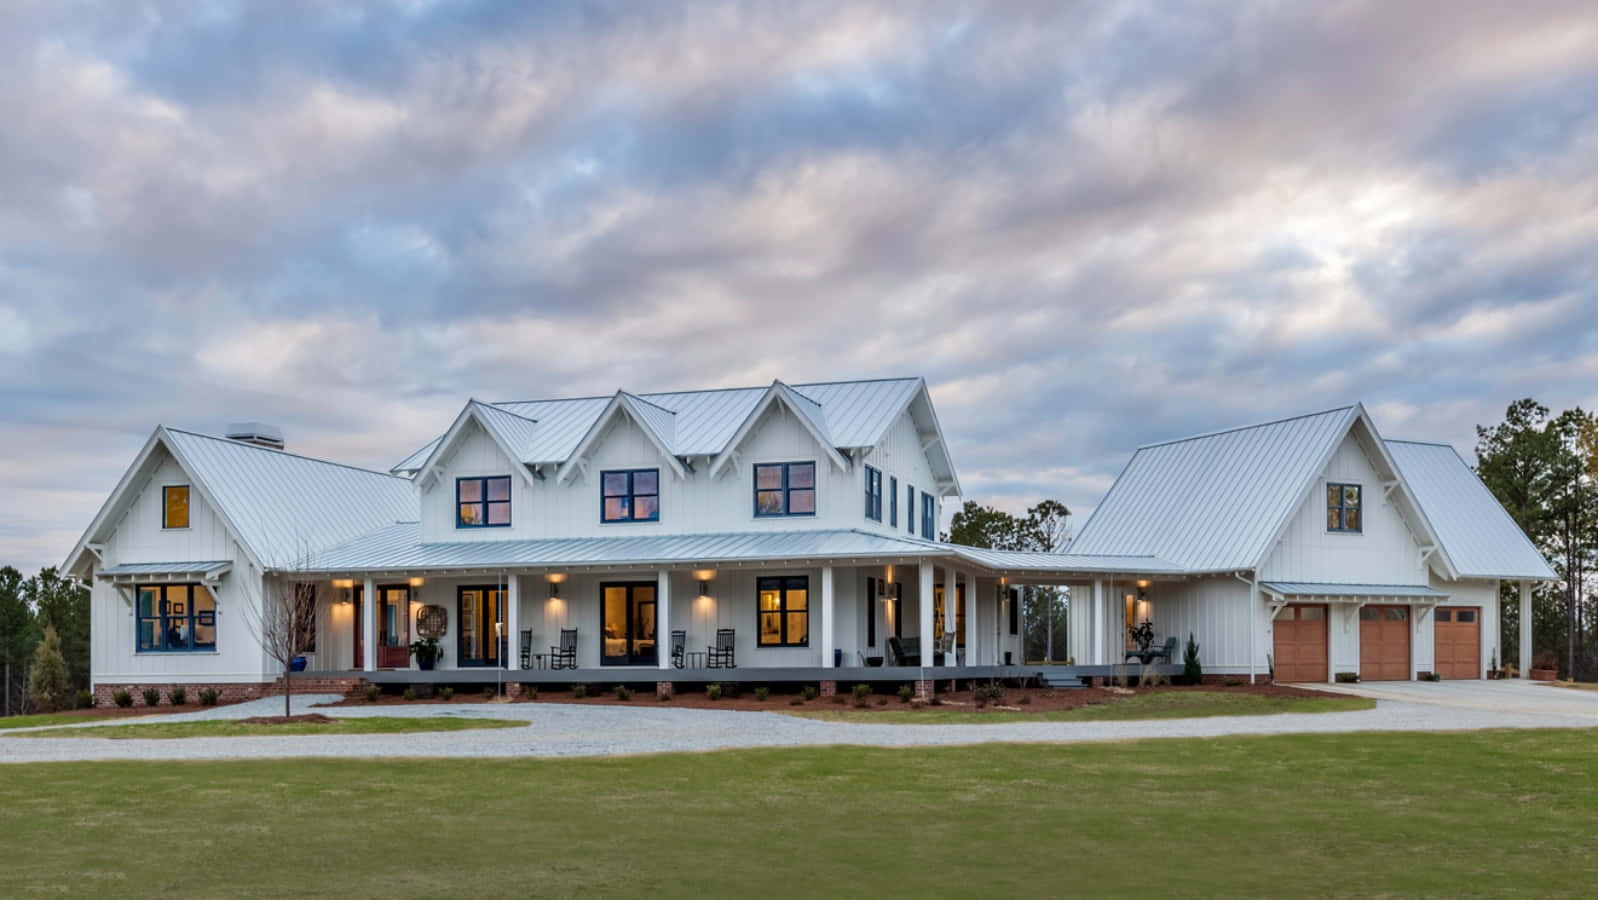 A White Farmhouse With A Large Front Porch